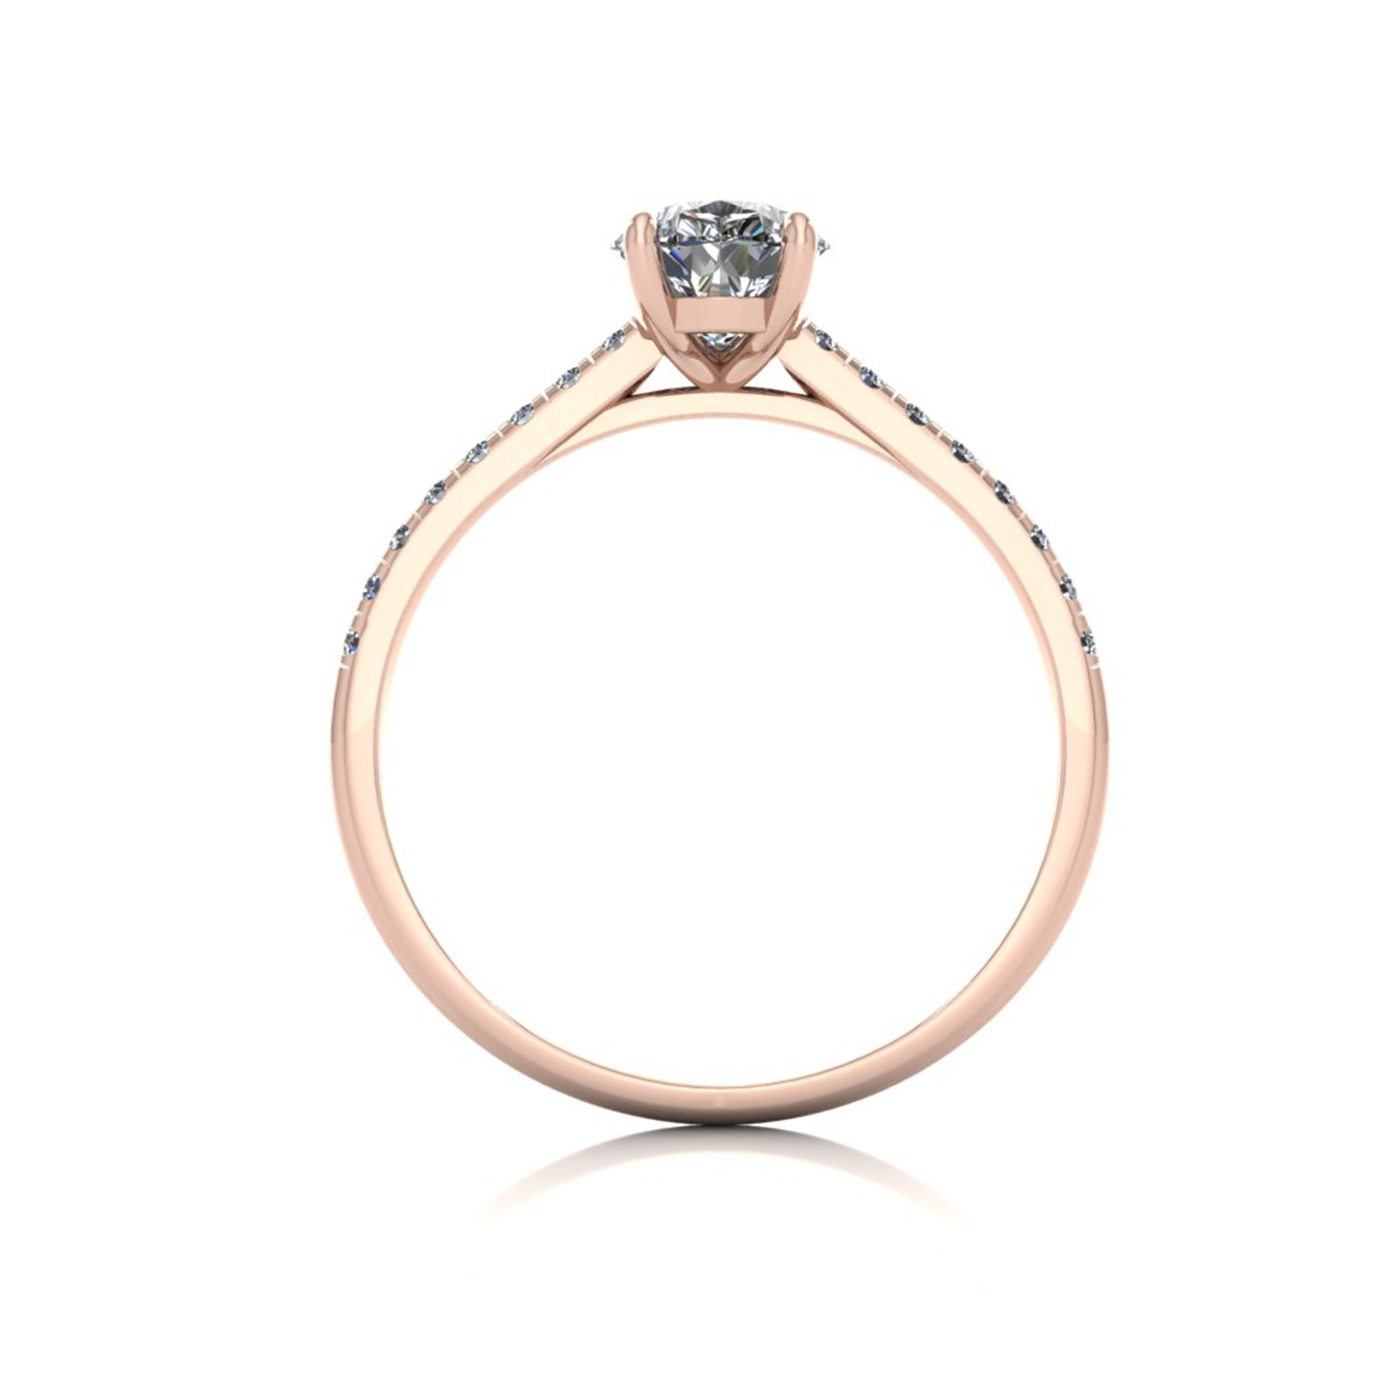 18k yellow gold 1.0ct 3 prongs pear diamond engagement ring with whisper thin pavÉ set band